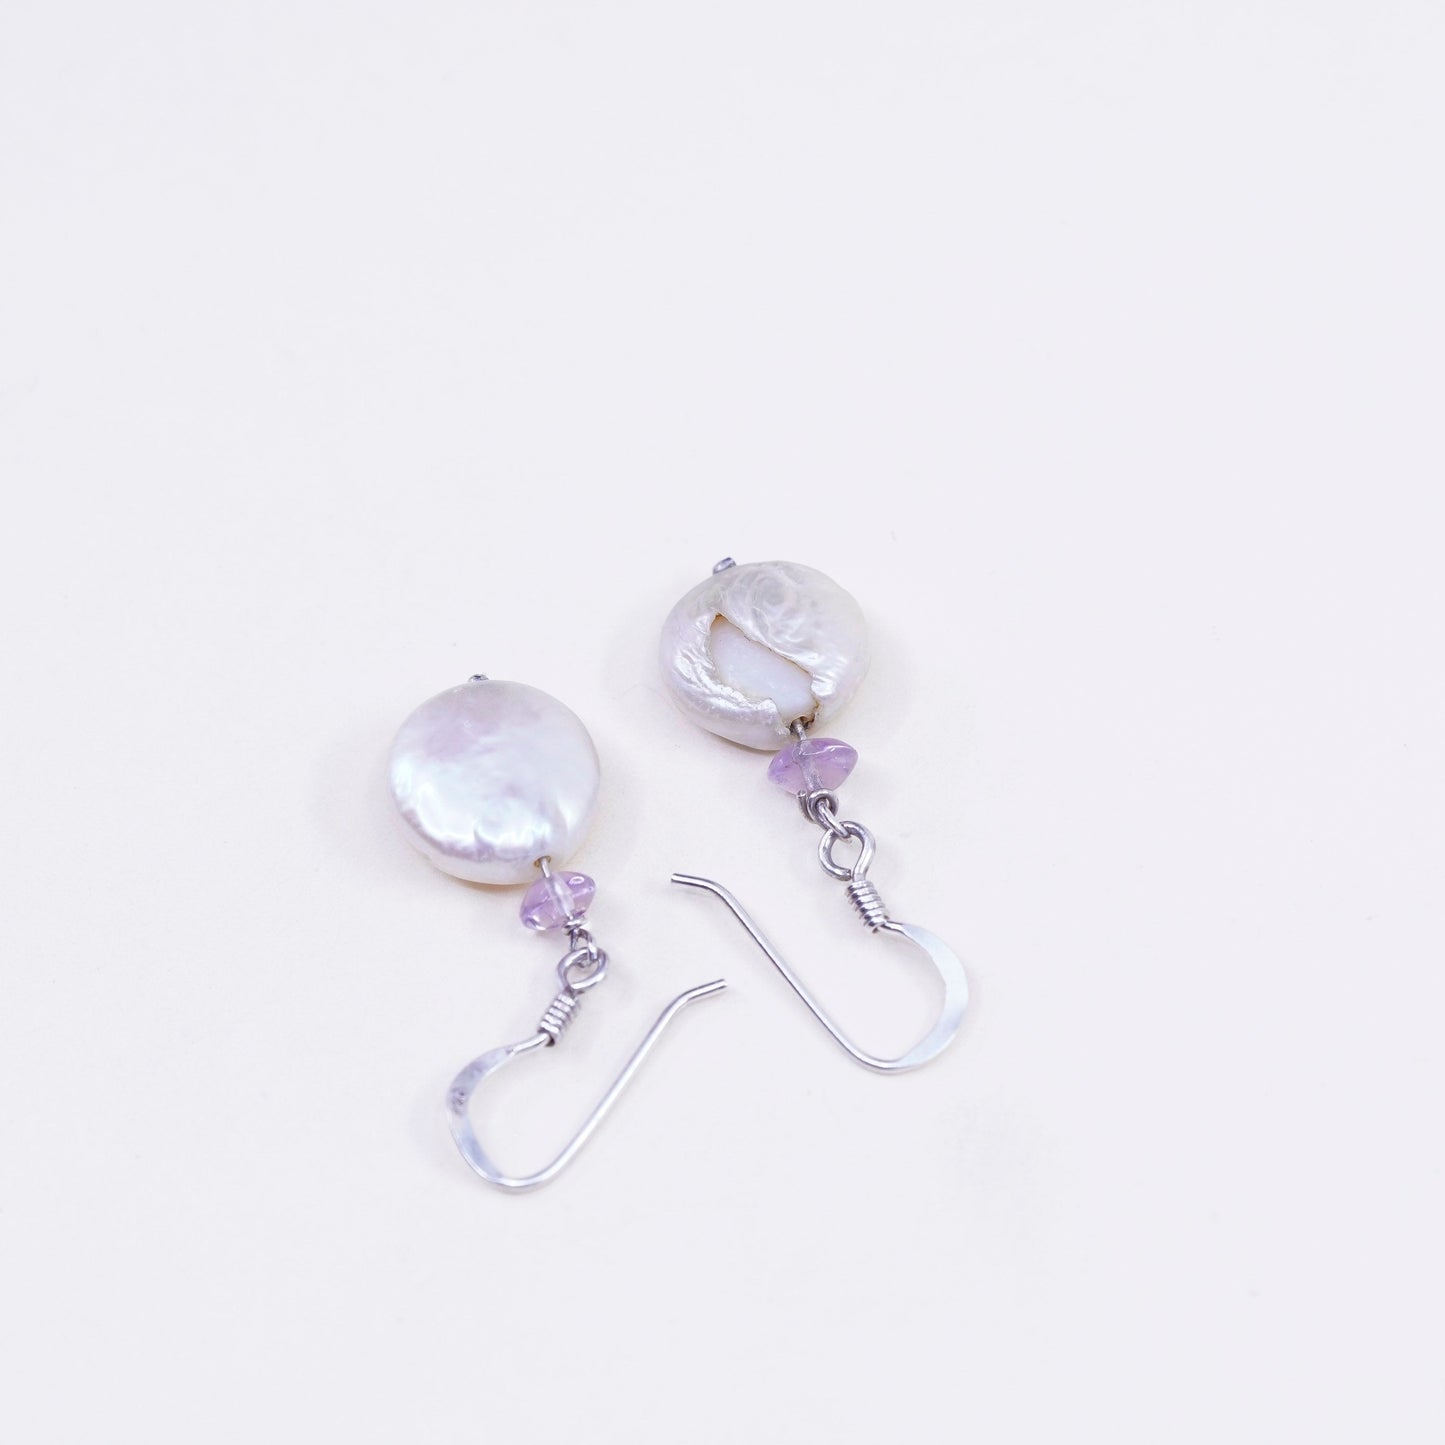 Vintage sterling silver handmade earrings, 925 dangles with coin pearl